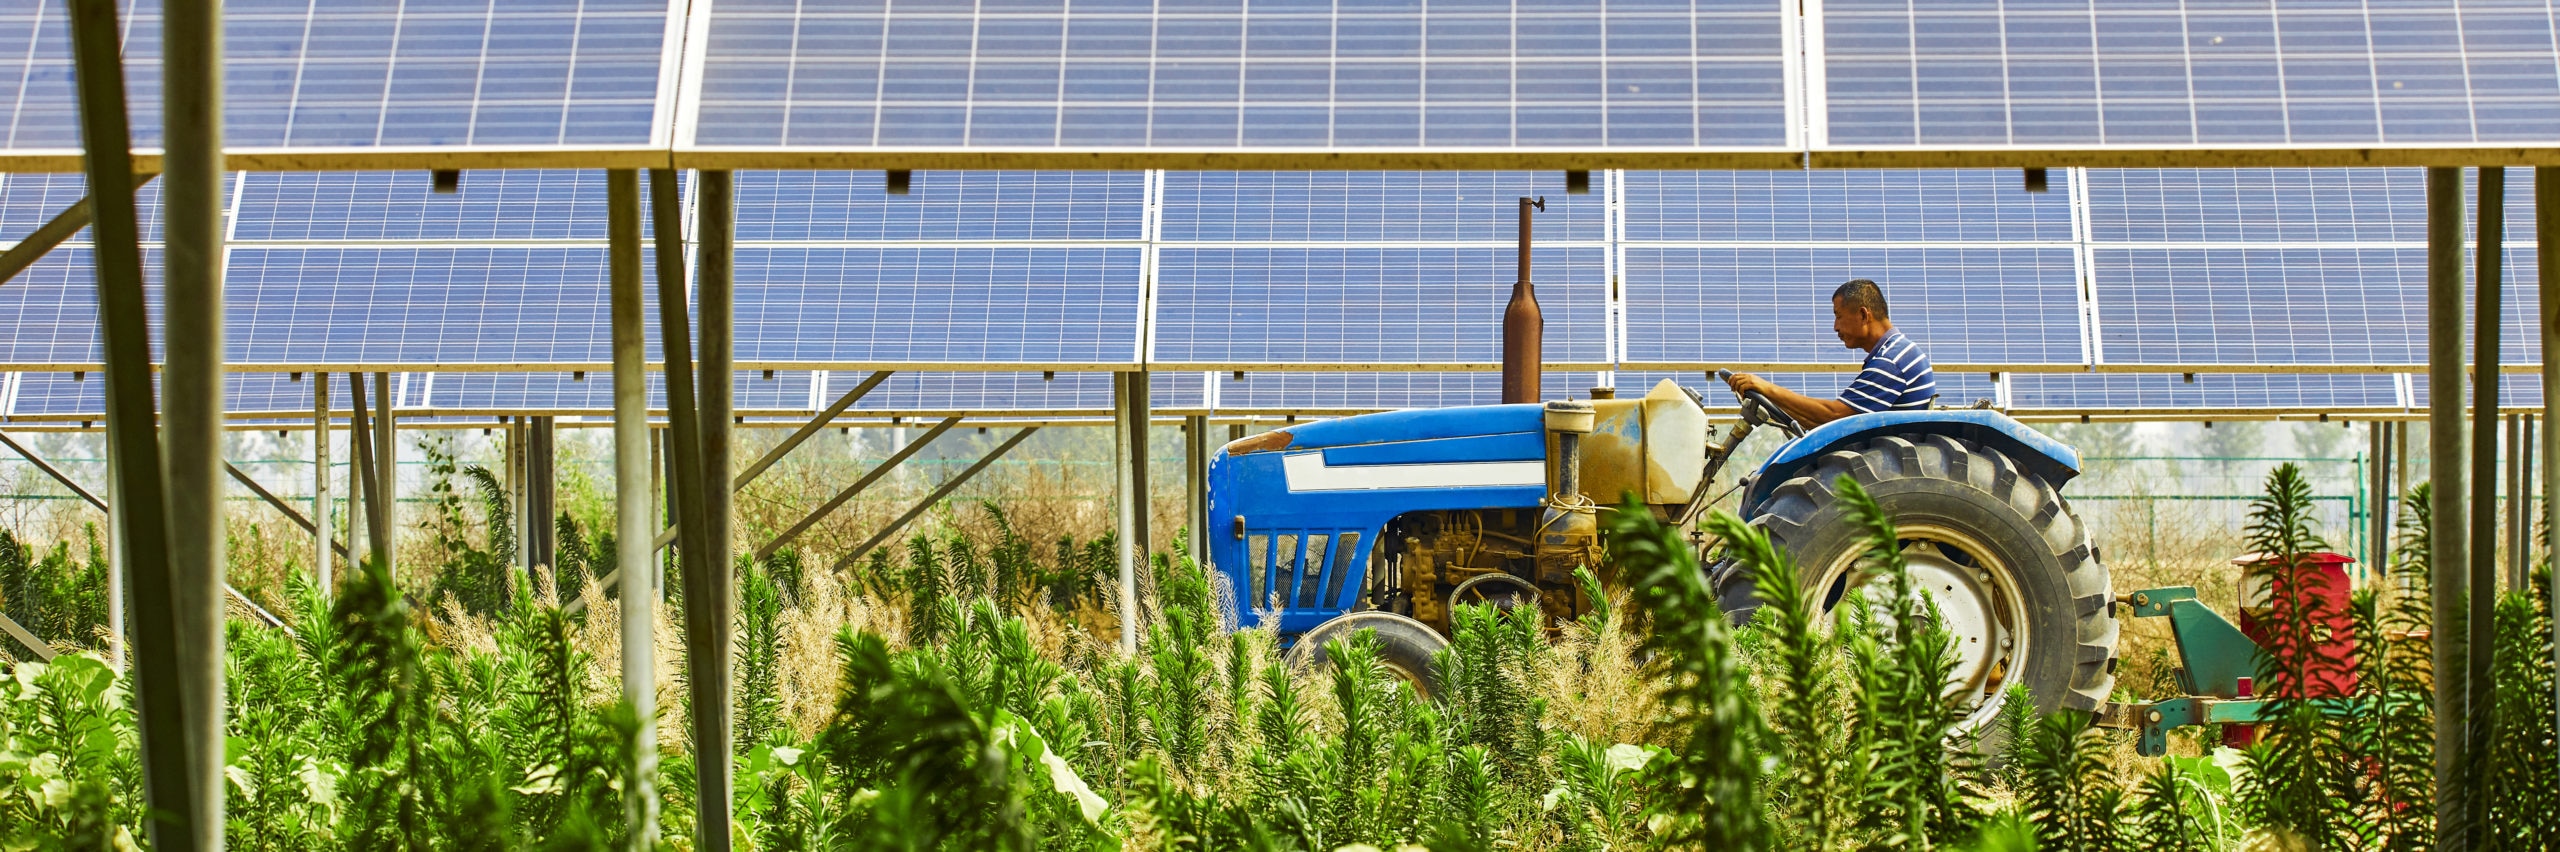 Solar photovoltaic area to open the tractor of the elderly - Image [shutterstock]